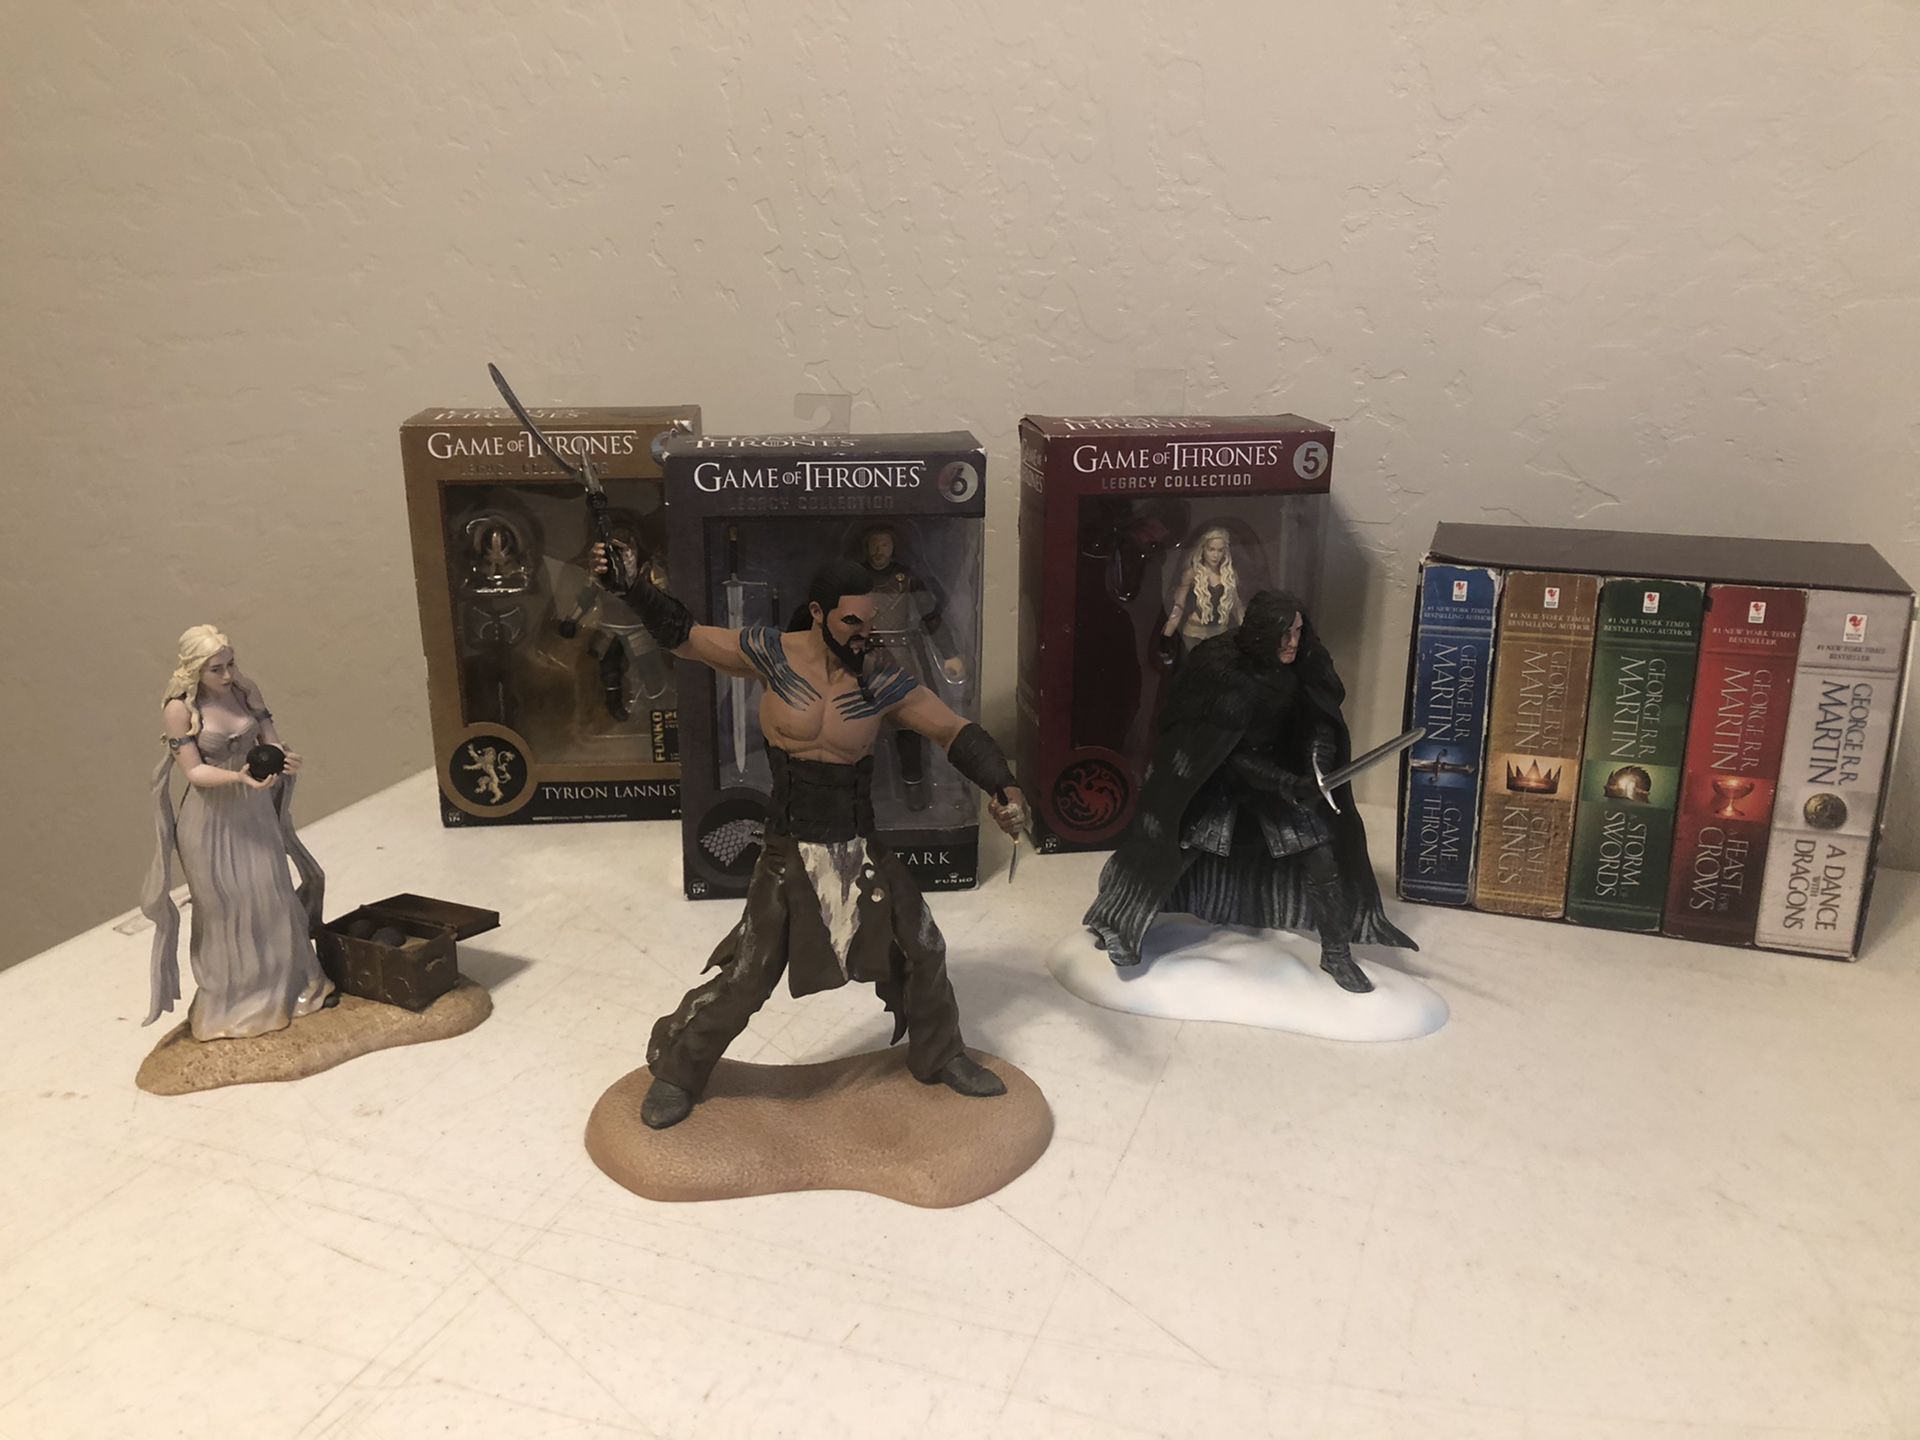 Game of Thrones action figures from the legacy collection by Funko